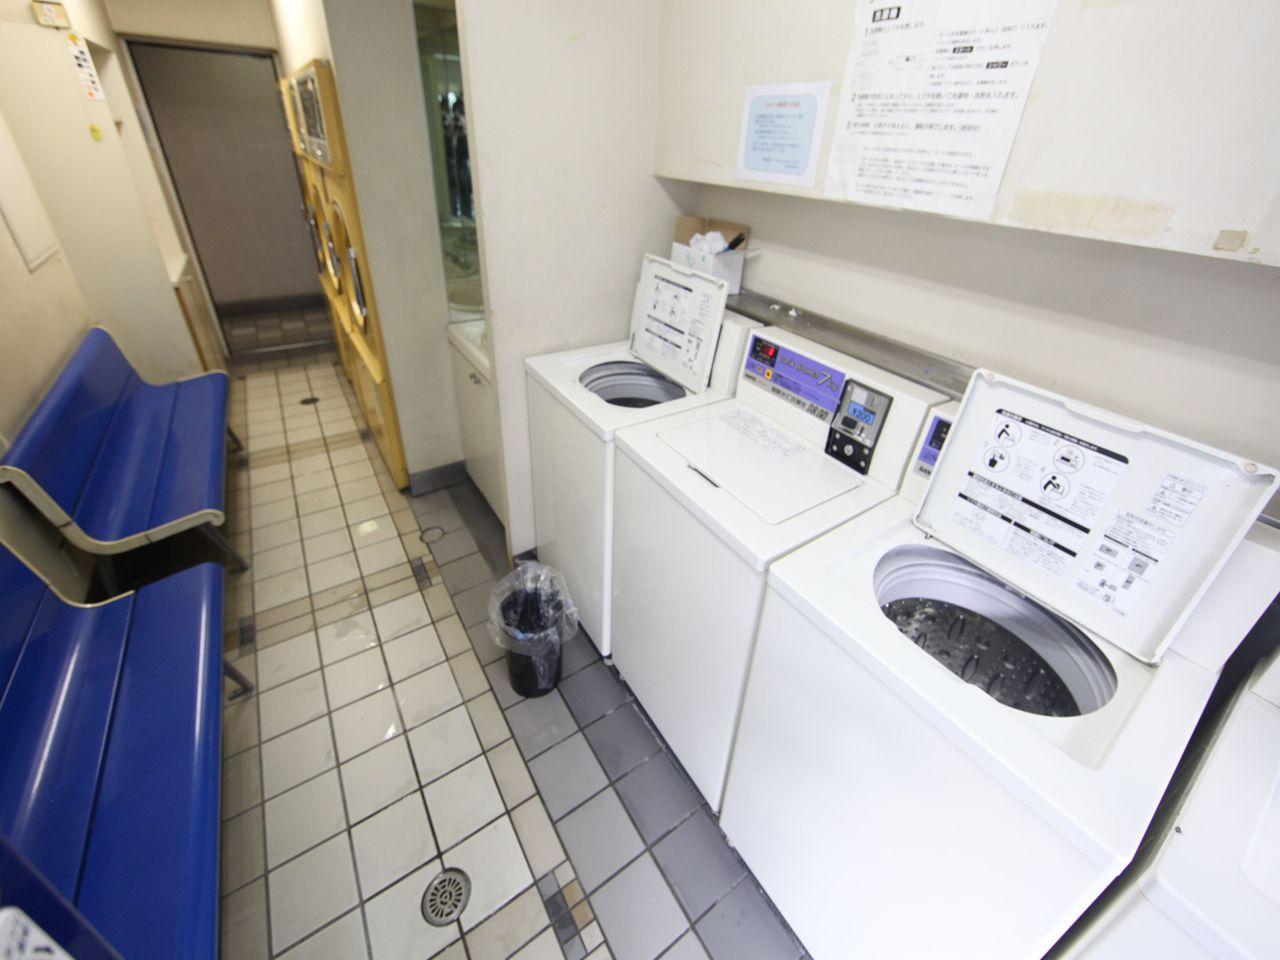 Other common areas. It comes with a coin-operated laundry on the first floor